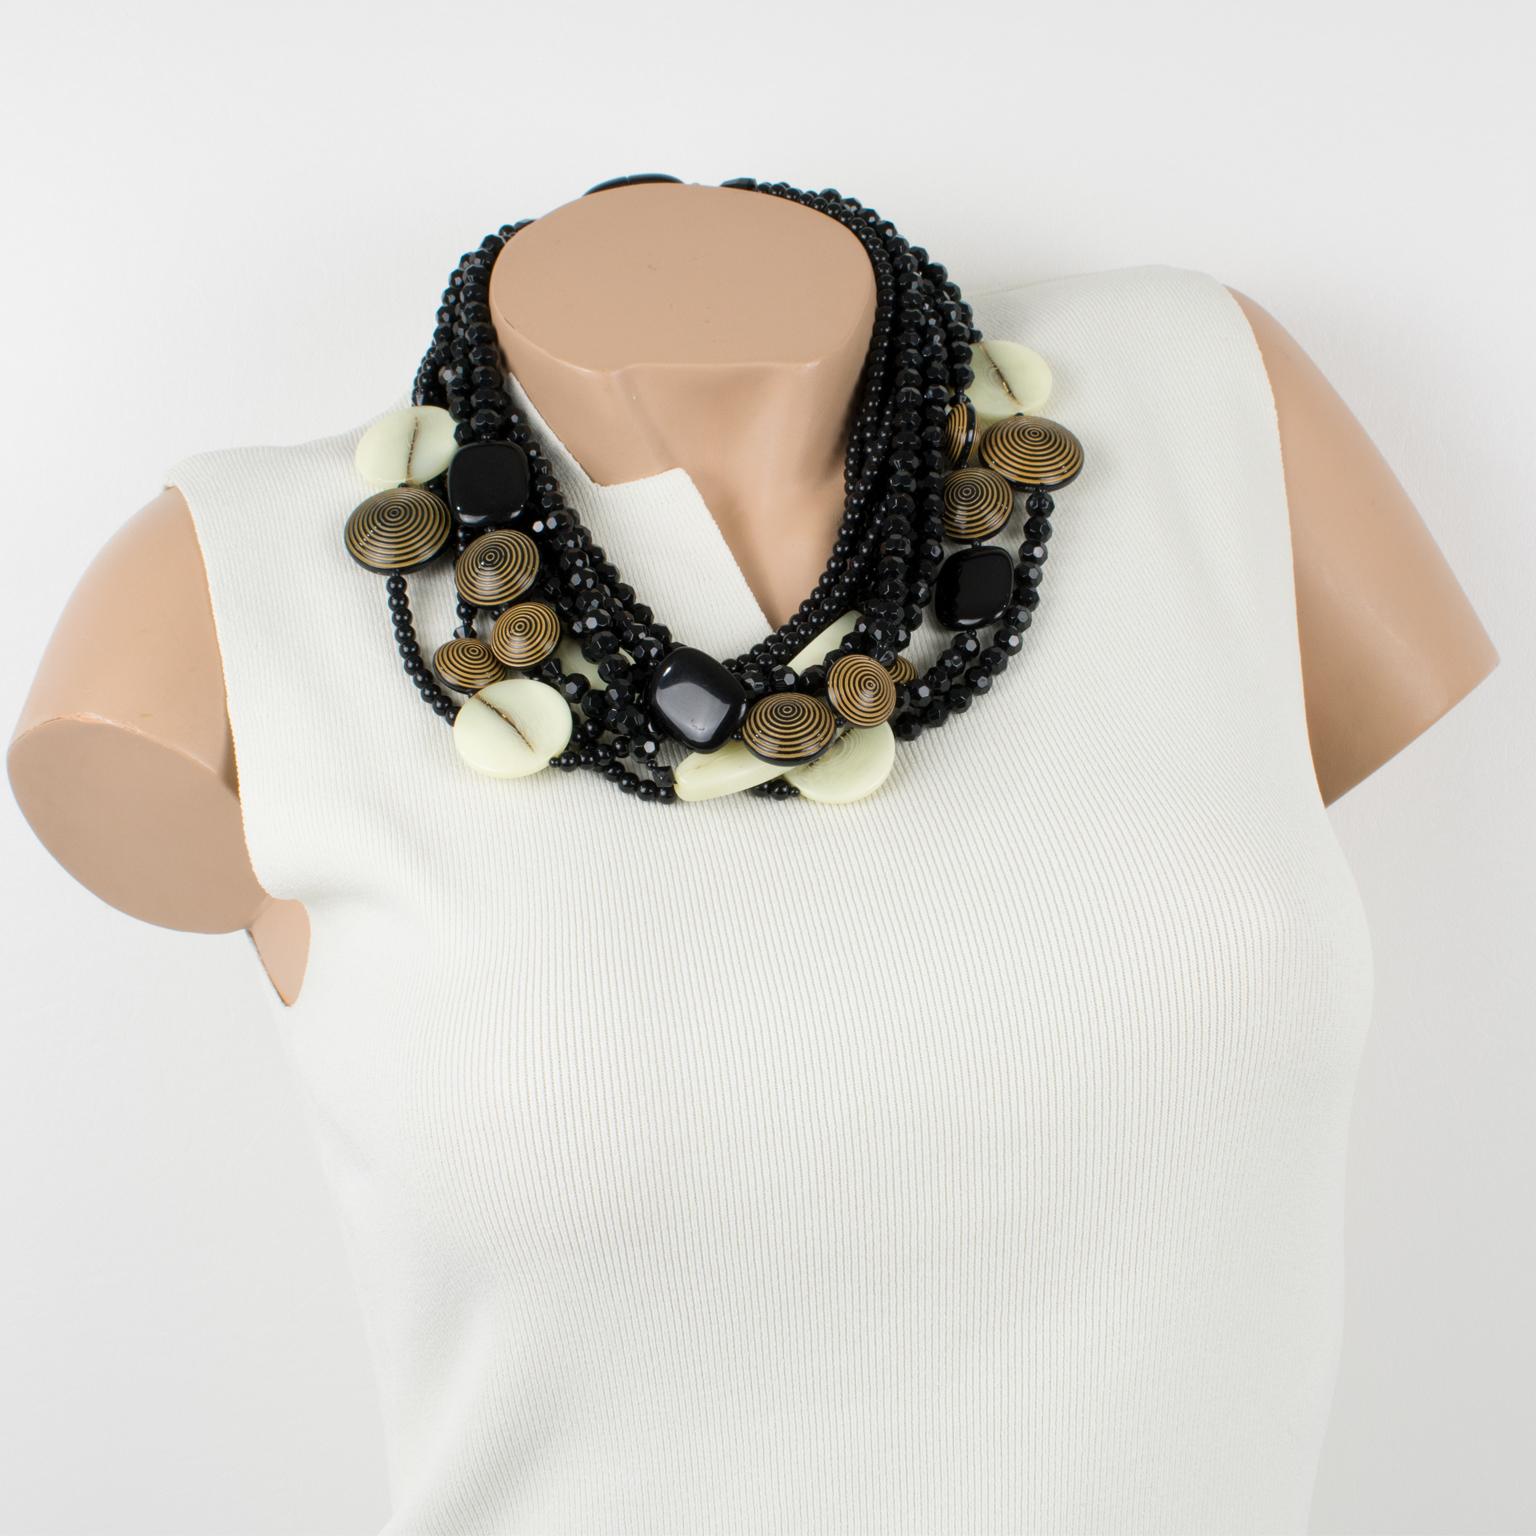 This refined Angela Caputi, made-in-Italy resin choker necklace features an oversized multi-strand design with a dominant black color contrasted with chocolate brown and cream-white tones. The black resin beads are faceted and are complemented by